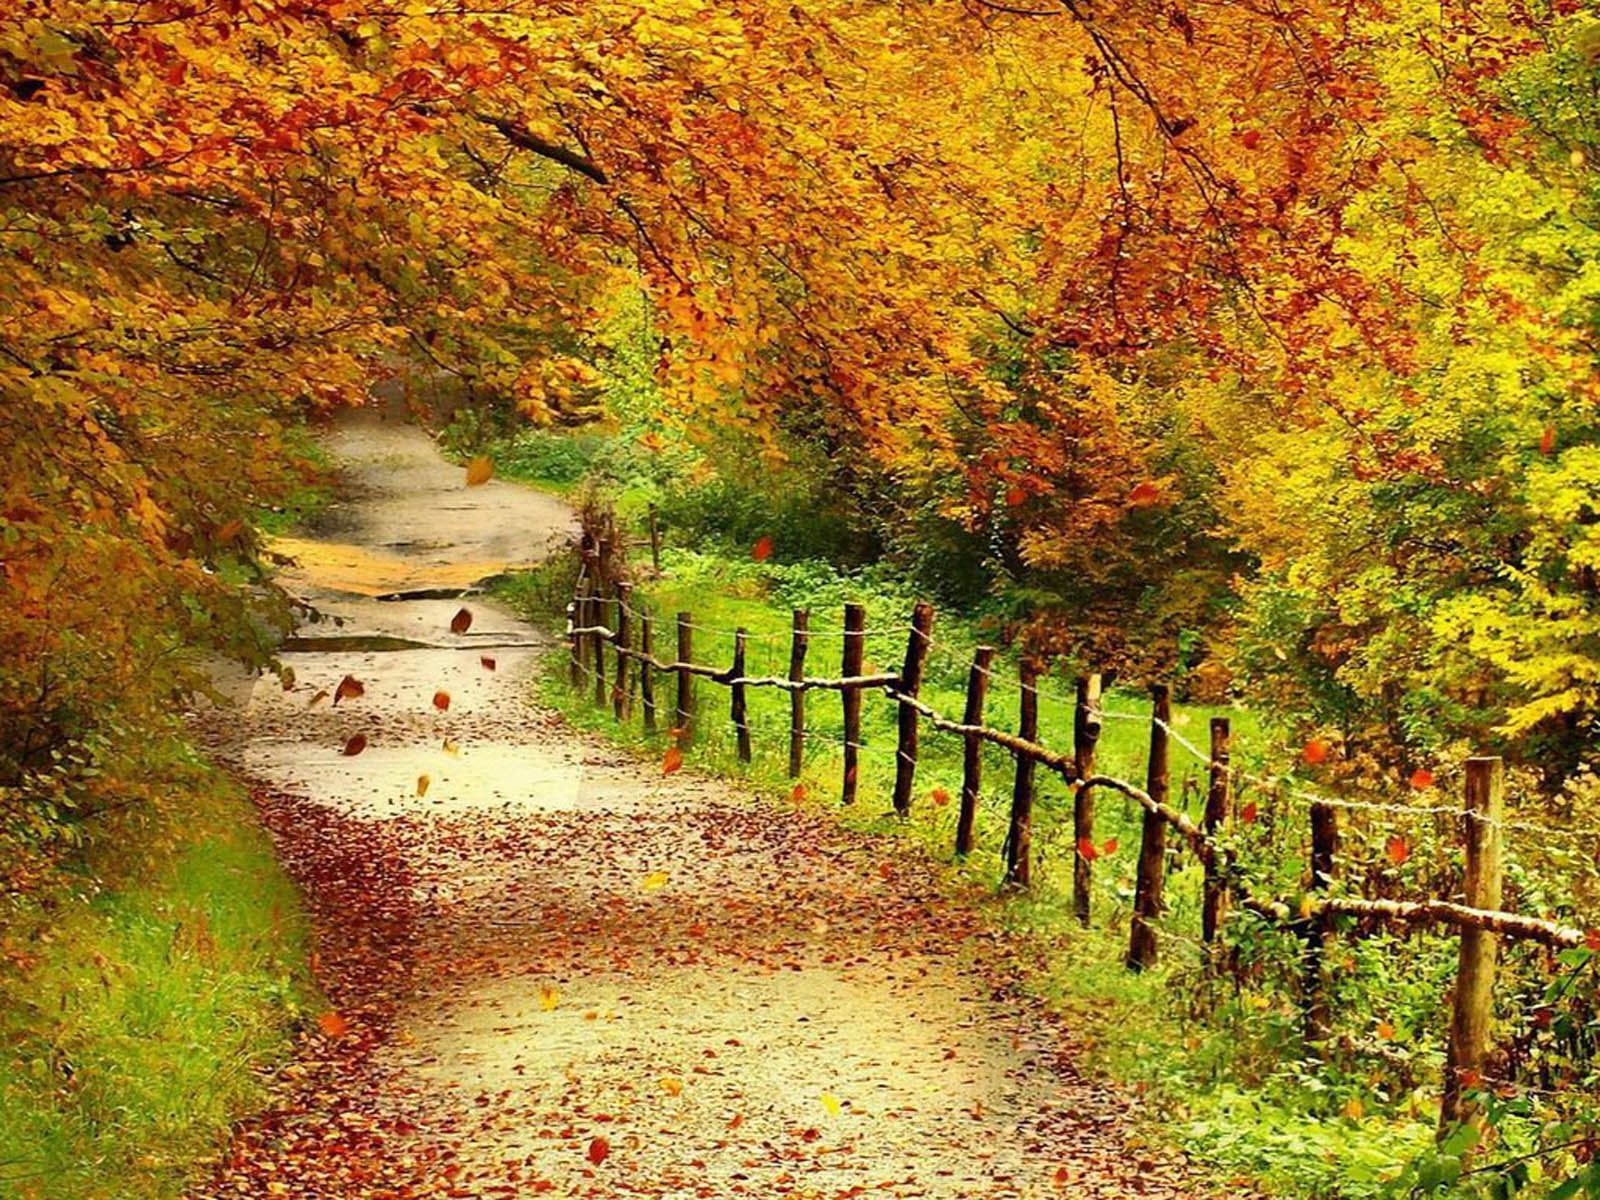 Autumn Scenery Wallpaper Background Photos Image And Pictures For